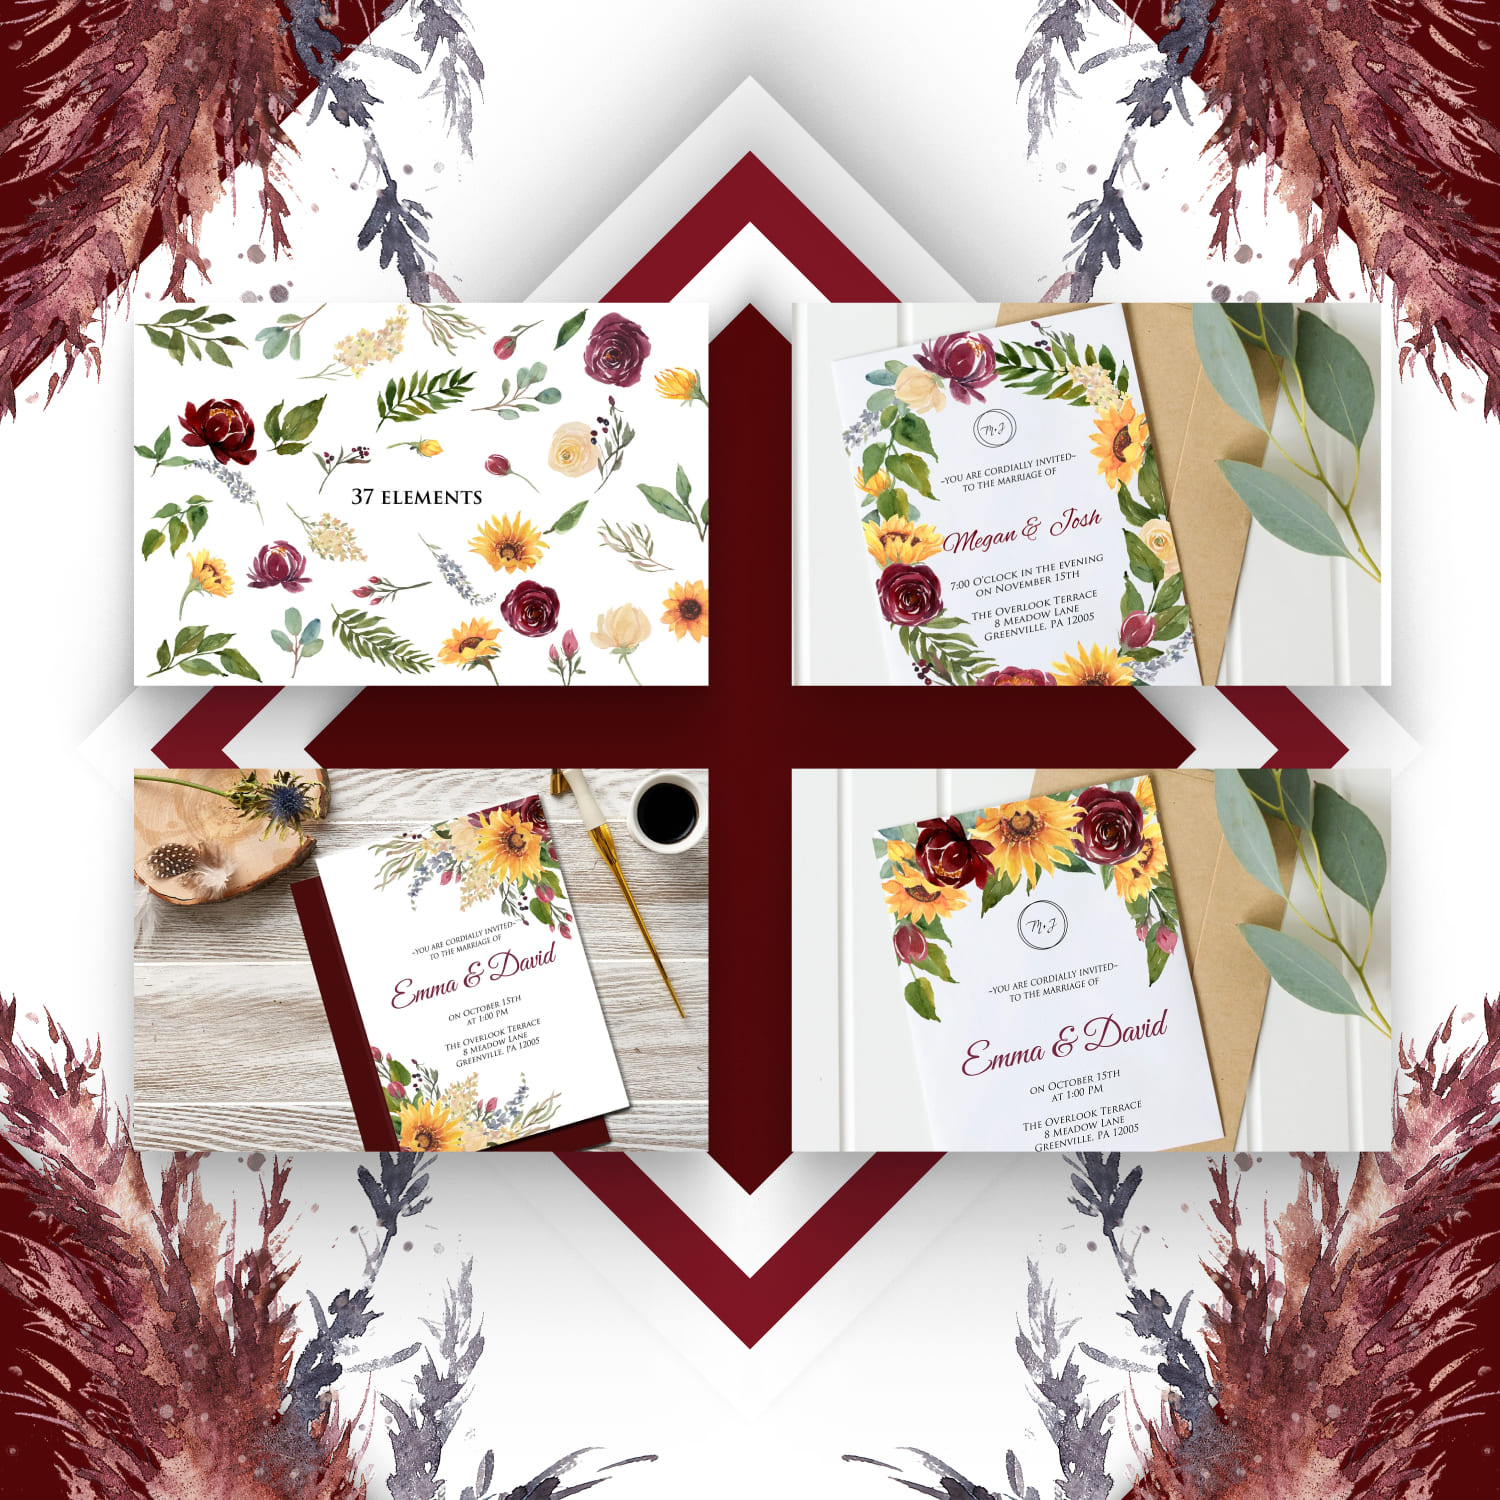 Sunflowers and Burgundy Flowers cover.